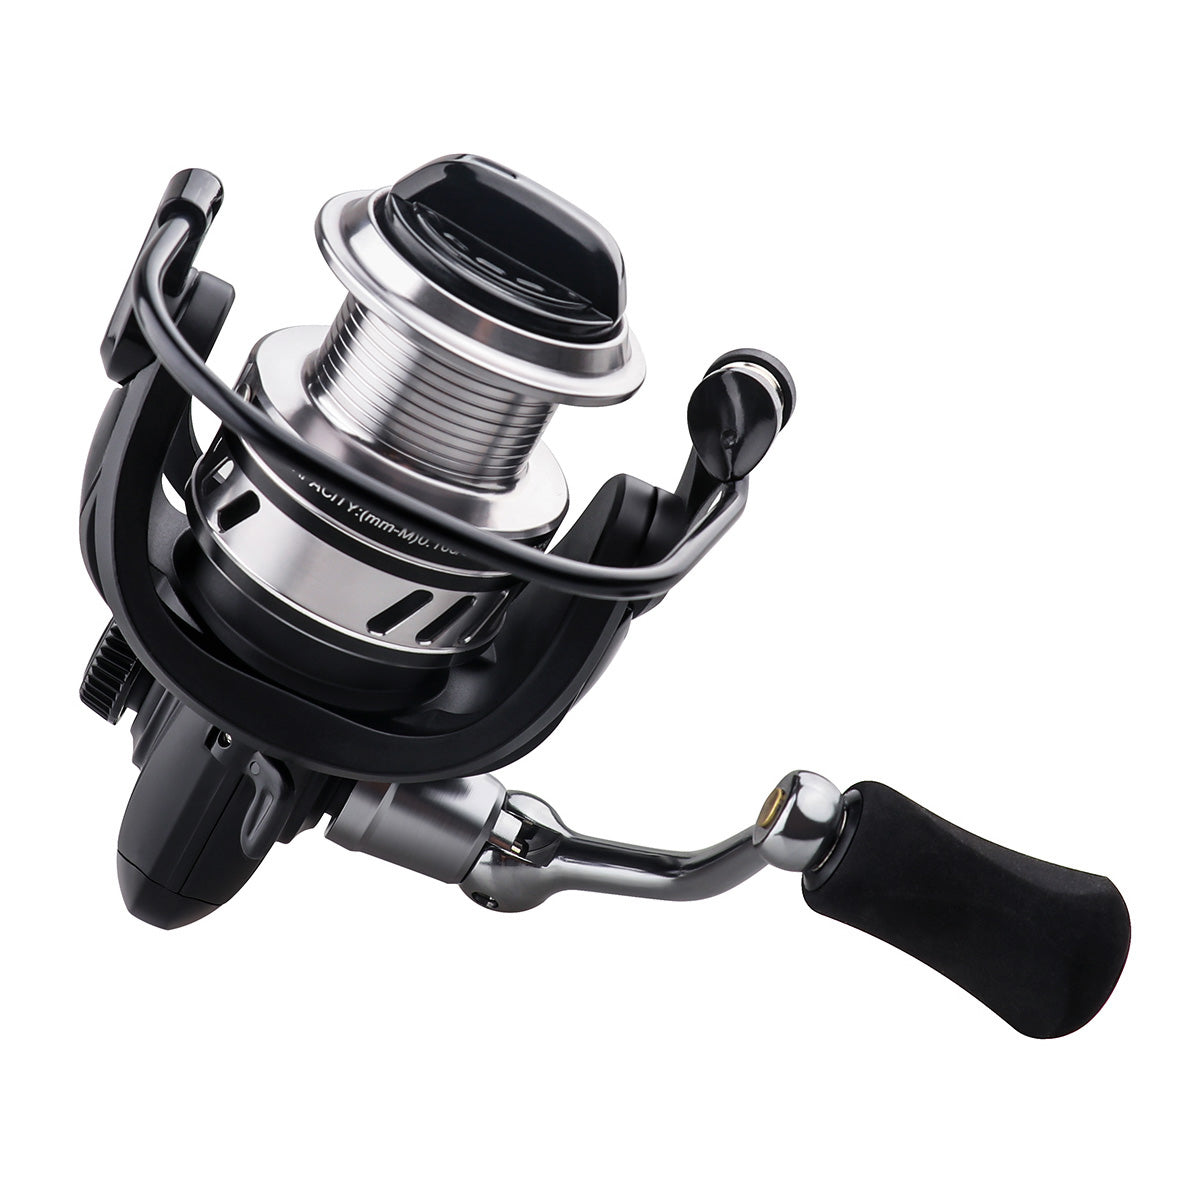 Ashconfish Spinning Reel, Saltwater Spinning Fishing Reels, Ultra  Lightweight Body, 8 Stainless Steel BB, 5.0:1 Gear Ratio, Max 17.6lbs Drag,  Come